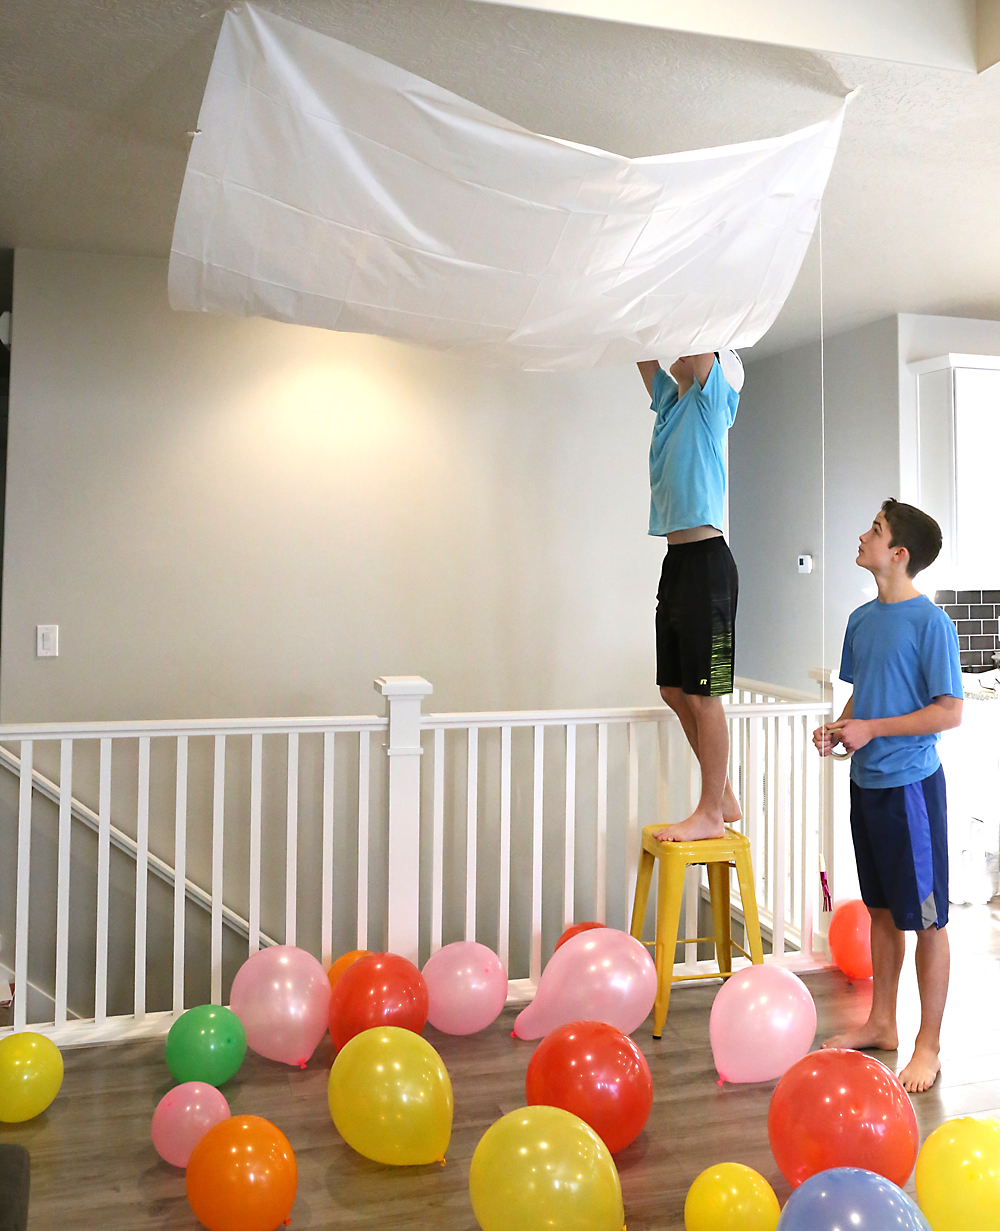 https://www.itsalwaysautumn.com/wp-content/uploads/2017/12/balloon-drop-for-new-years-eve-kids-home-easy-diy-how-to-make-2.jpg